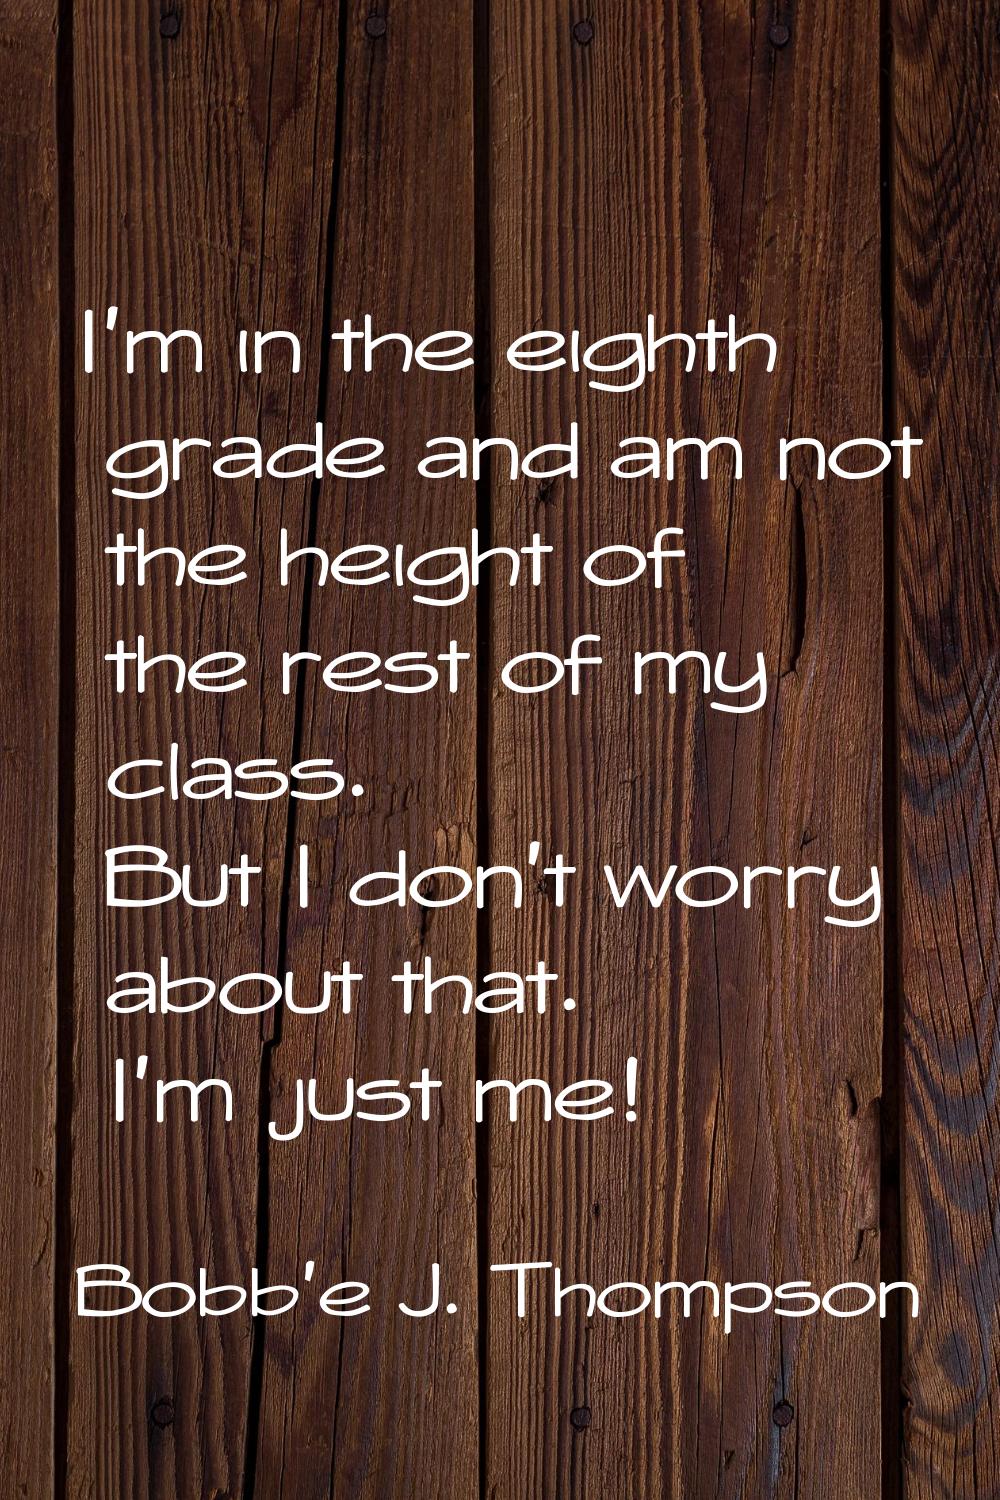 I'm in the eighth grade and am not the height of the rest of my class. But I don't worry about that